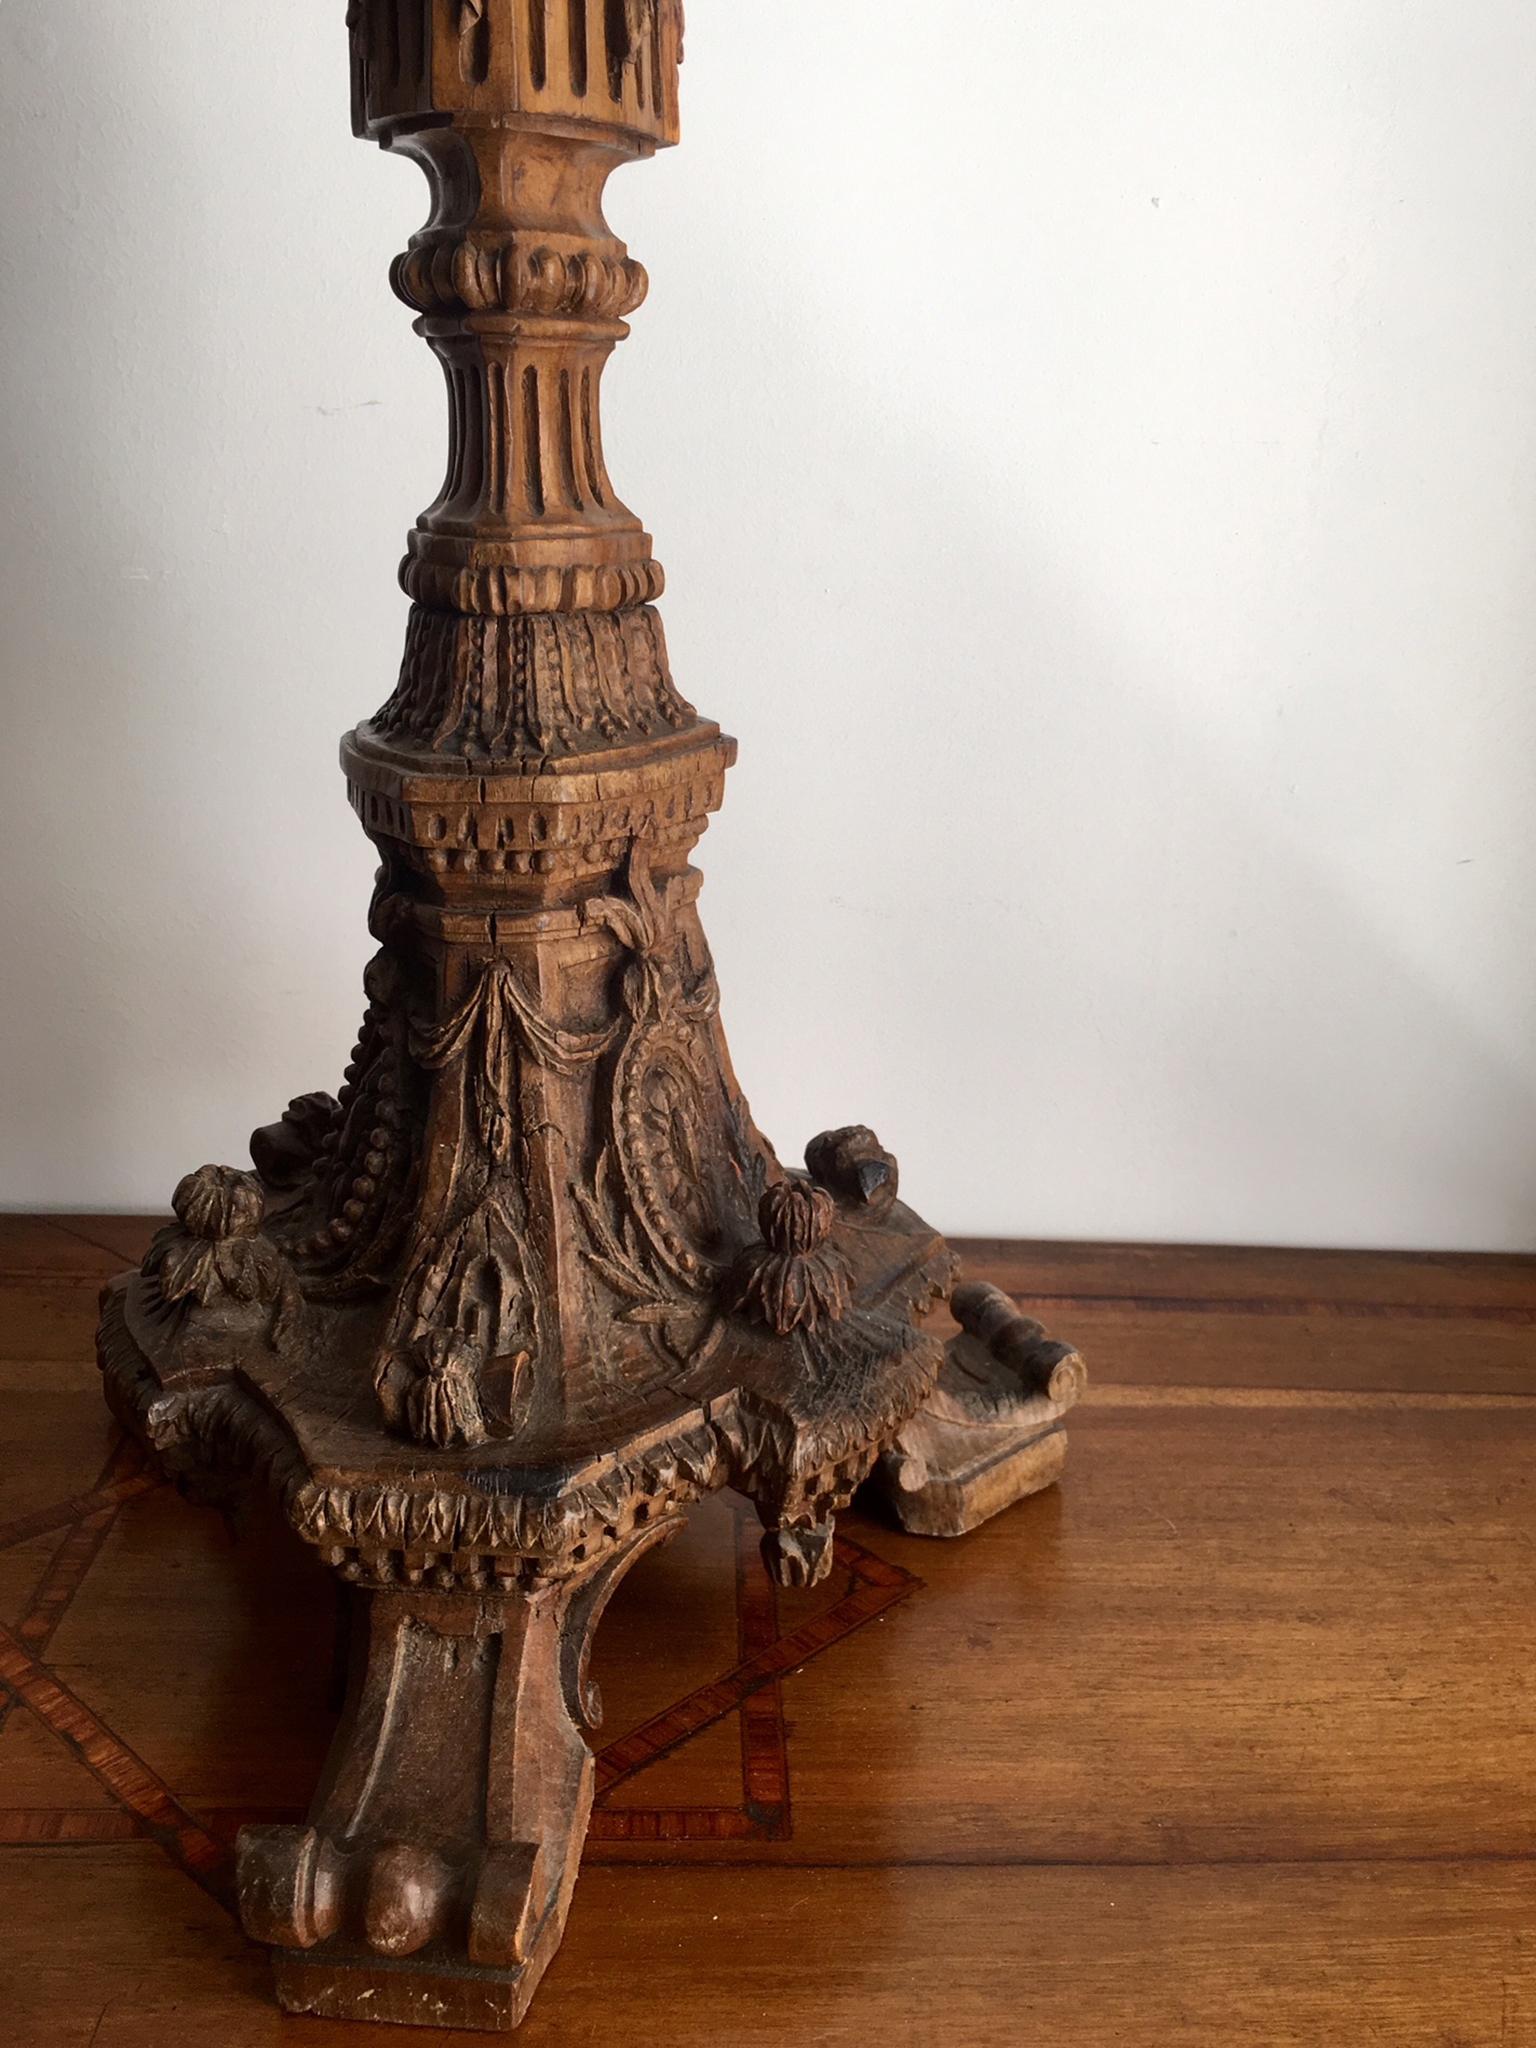 Antique baroque Portuguese candle stick mounted as floor lamp, hand carved tall column manufactured in walnut.

Dimensions are of candle stick only.